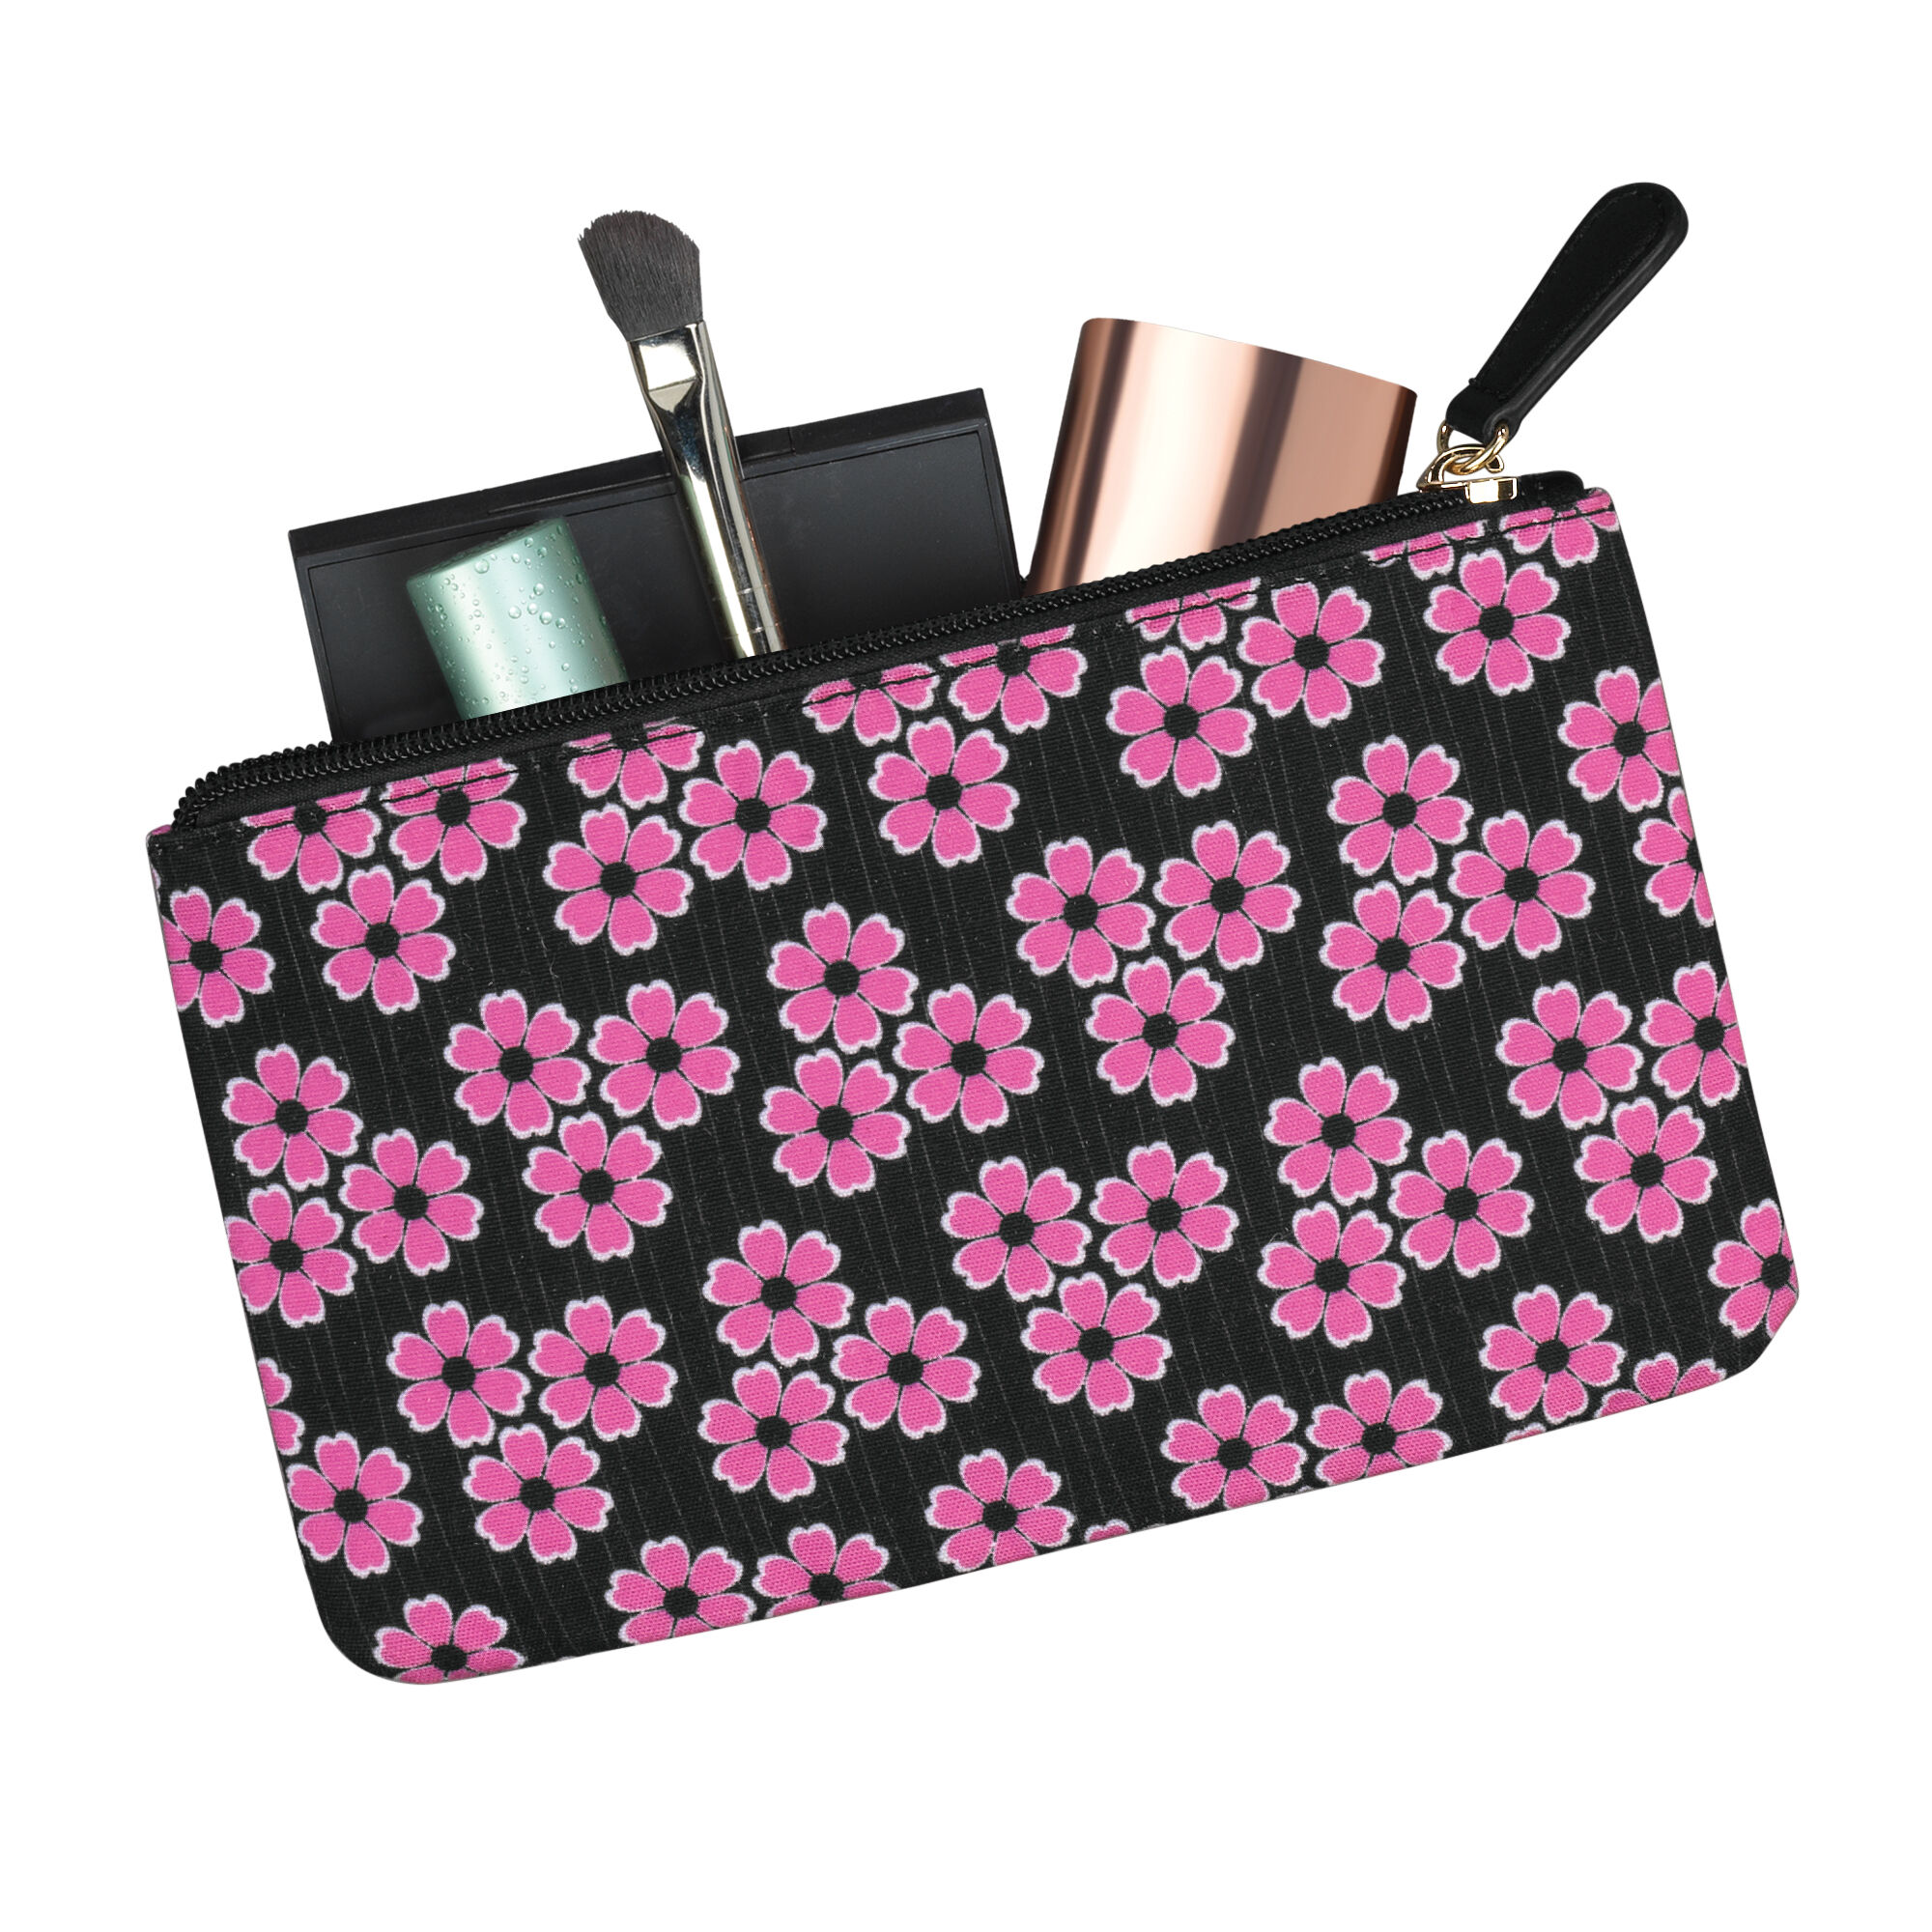 The Personalized Ultimate Travel Set 5548 0016 d clutch